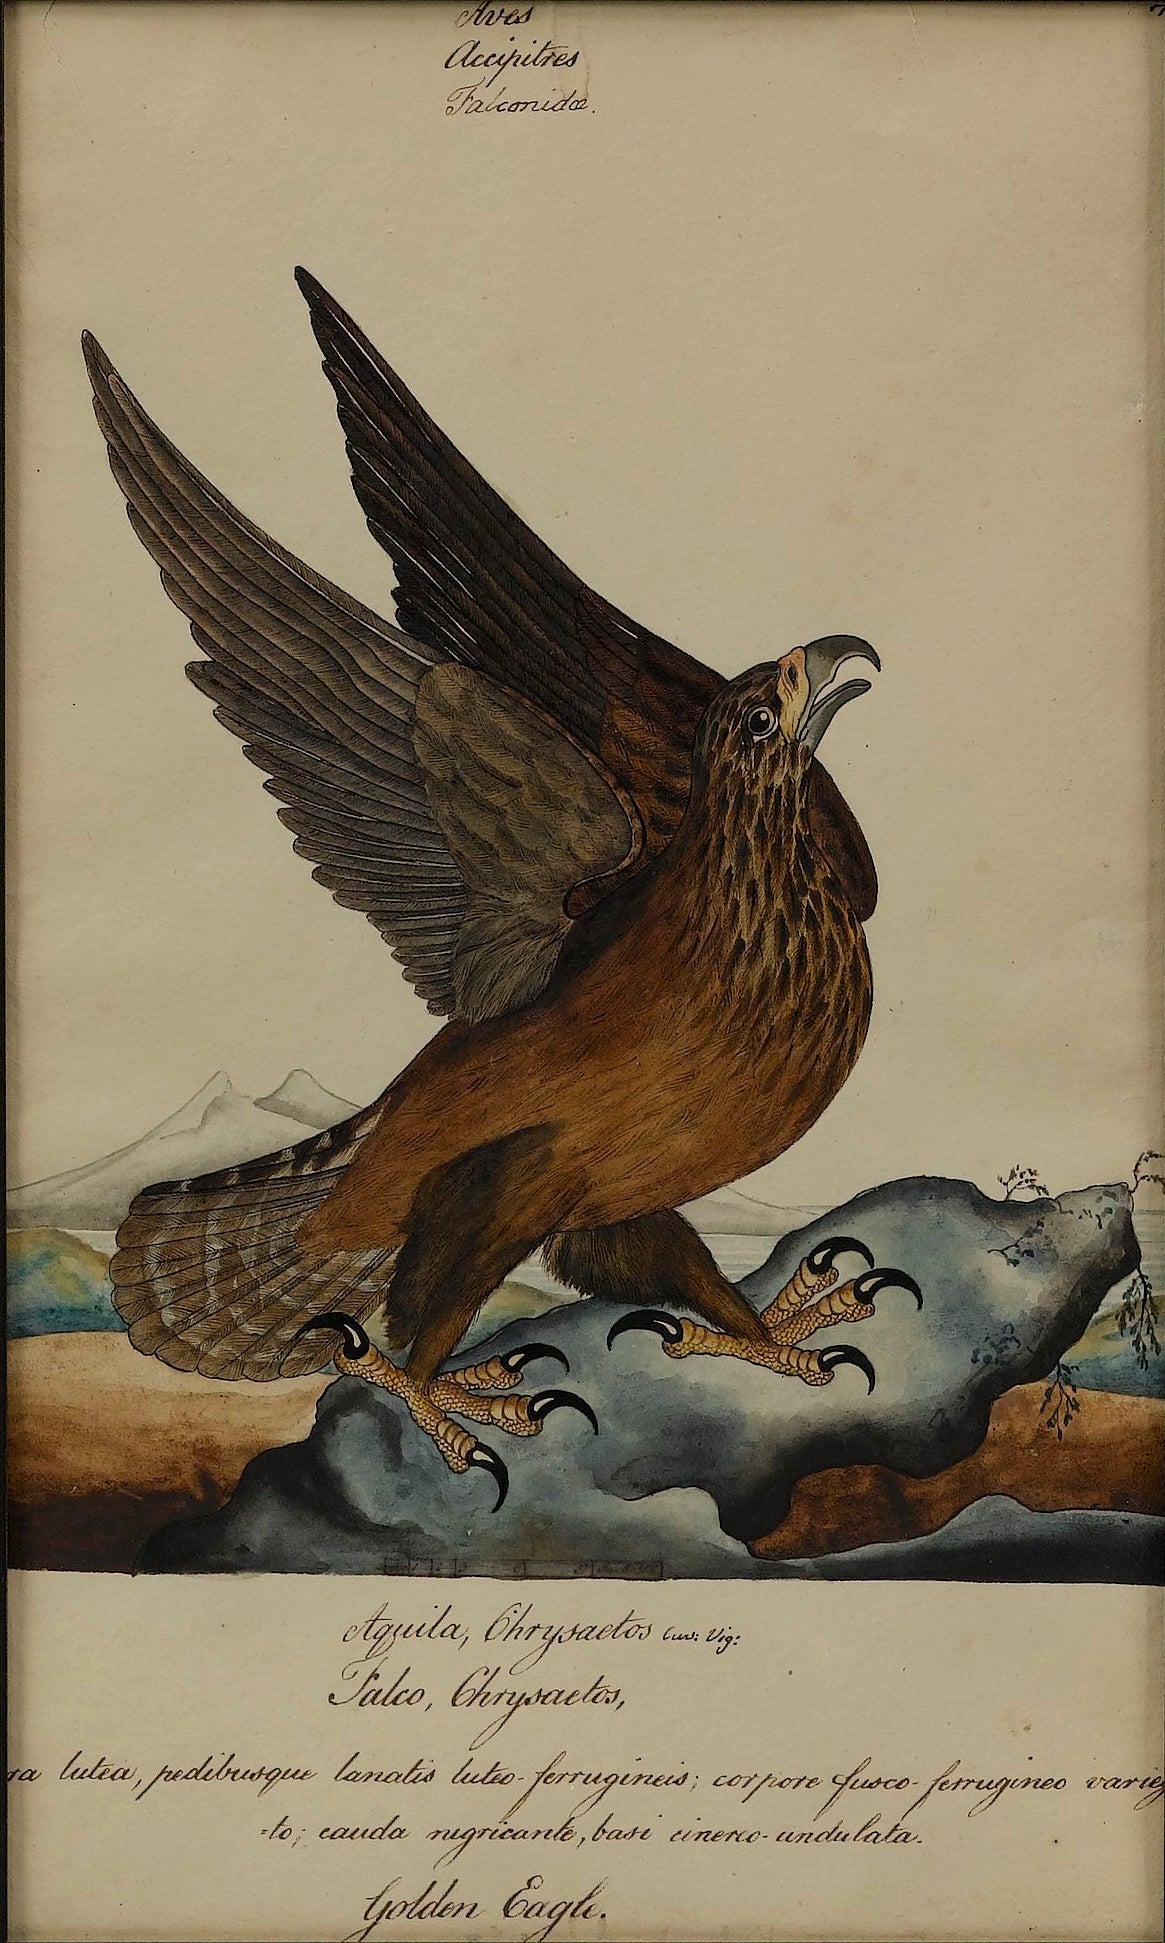 "Golden Eagle" by William Goodall, Watercolor and Ink Drawing, Early 19th Century - The Great Republic